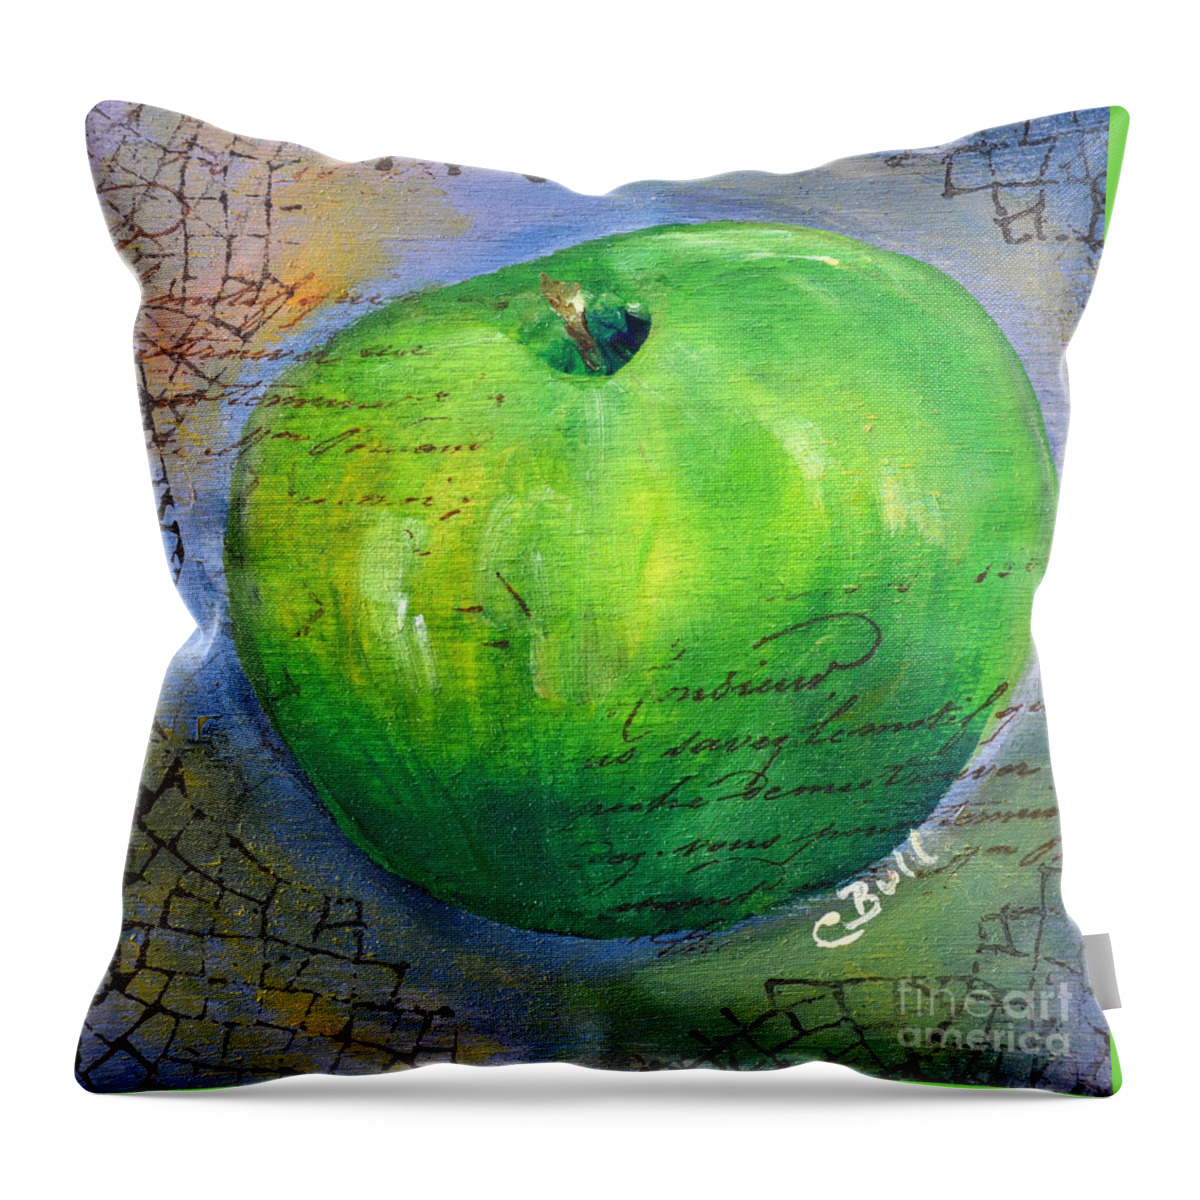 Green Apple Throw Pillow featuring the painting Green Apple by Claire Bull